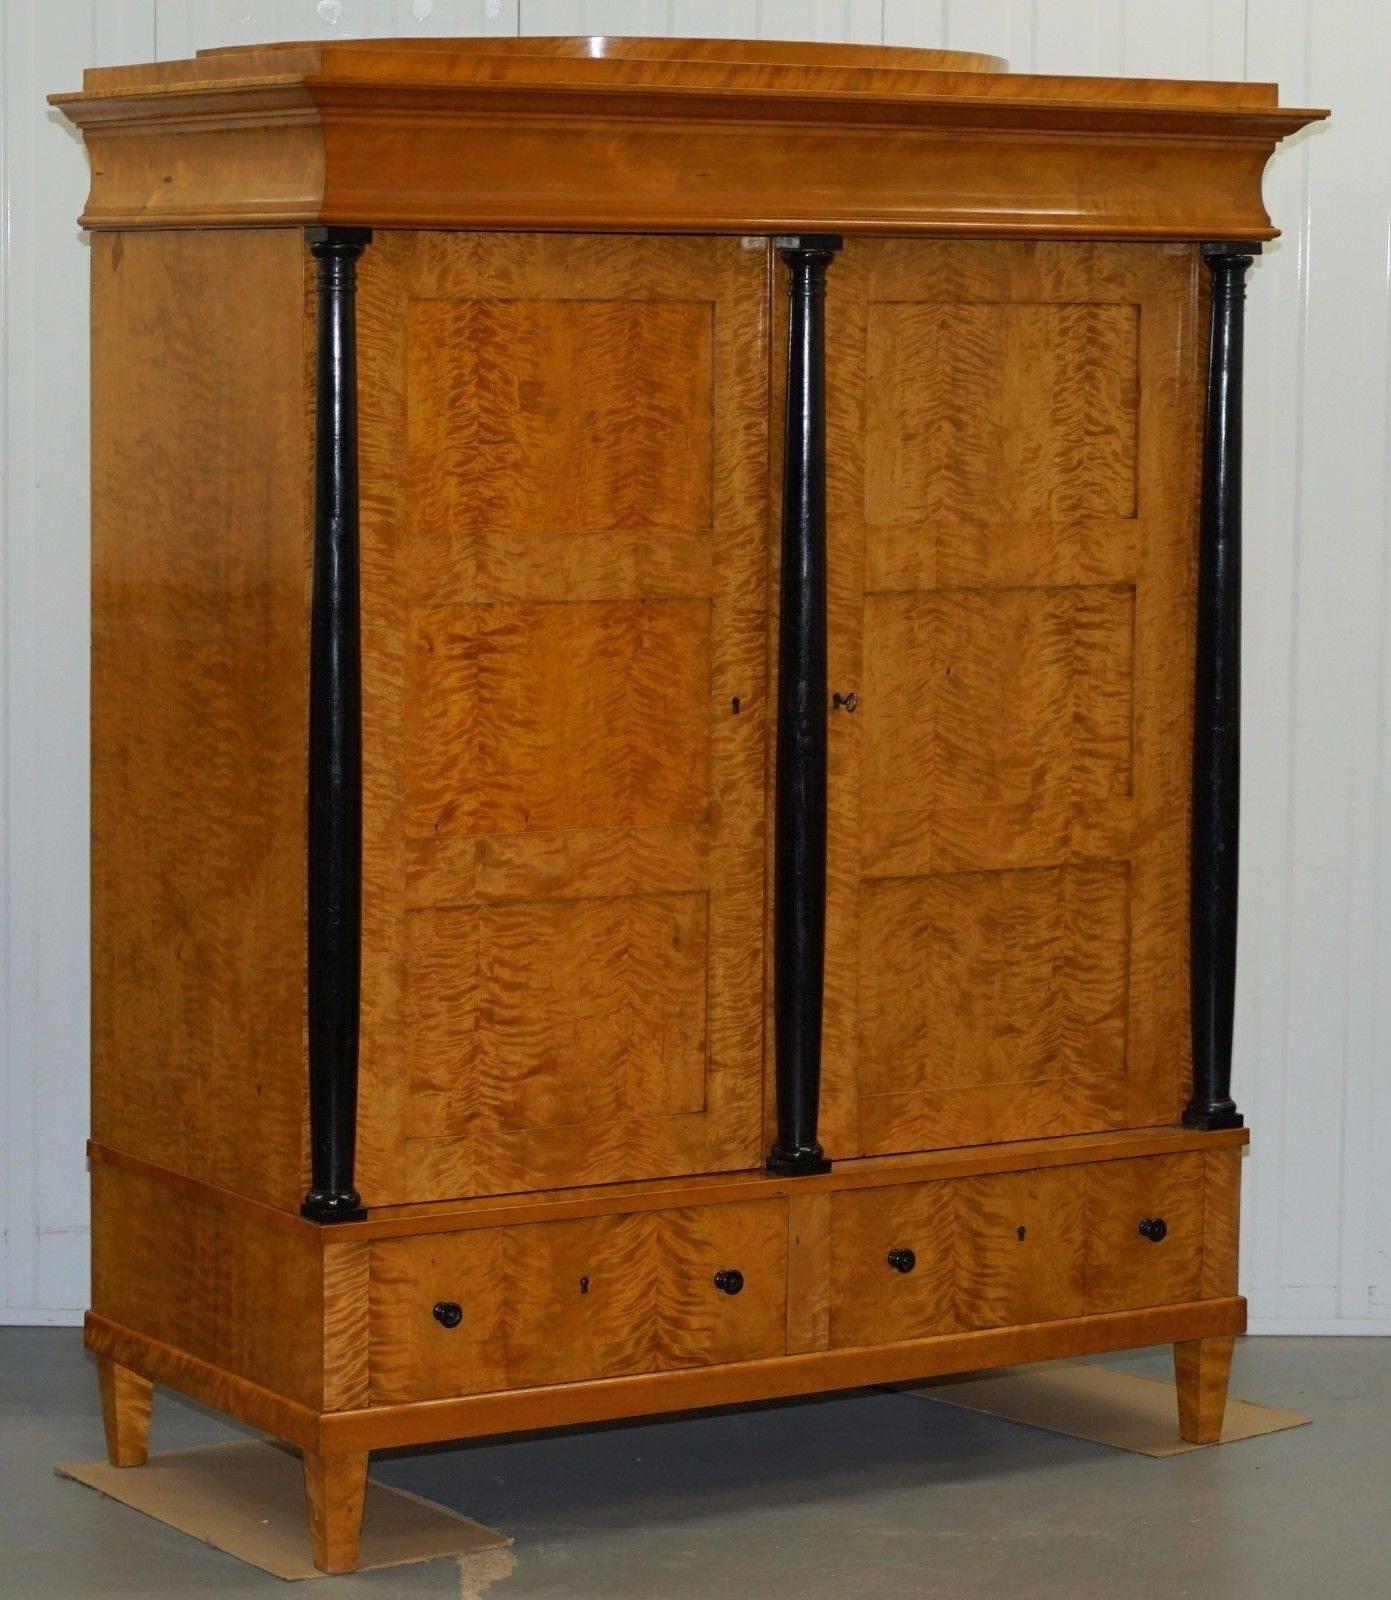 We are delighted to offer for sale this lovely solid flamed satin birch Swedish circa 1880 Biedermeier armoire pot cupboard

This is part of a suite, I have 12 dining chairs, an extending dining table, large marble topped sideboard and large